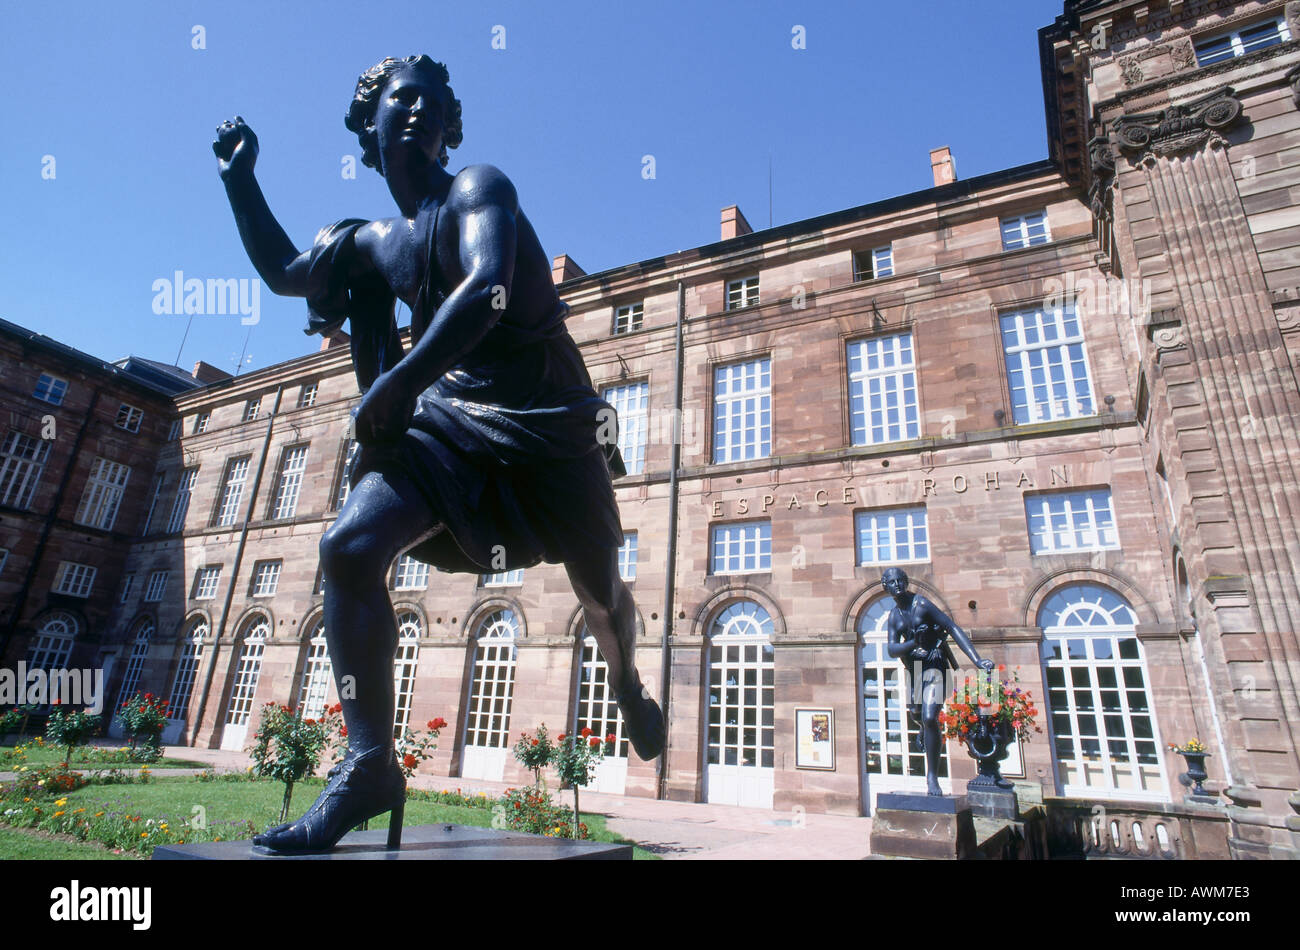 Statue in front of castle, Rohan Castle, Saverne, Alsace, France Stock Photo